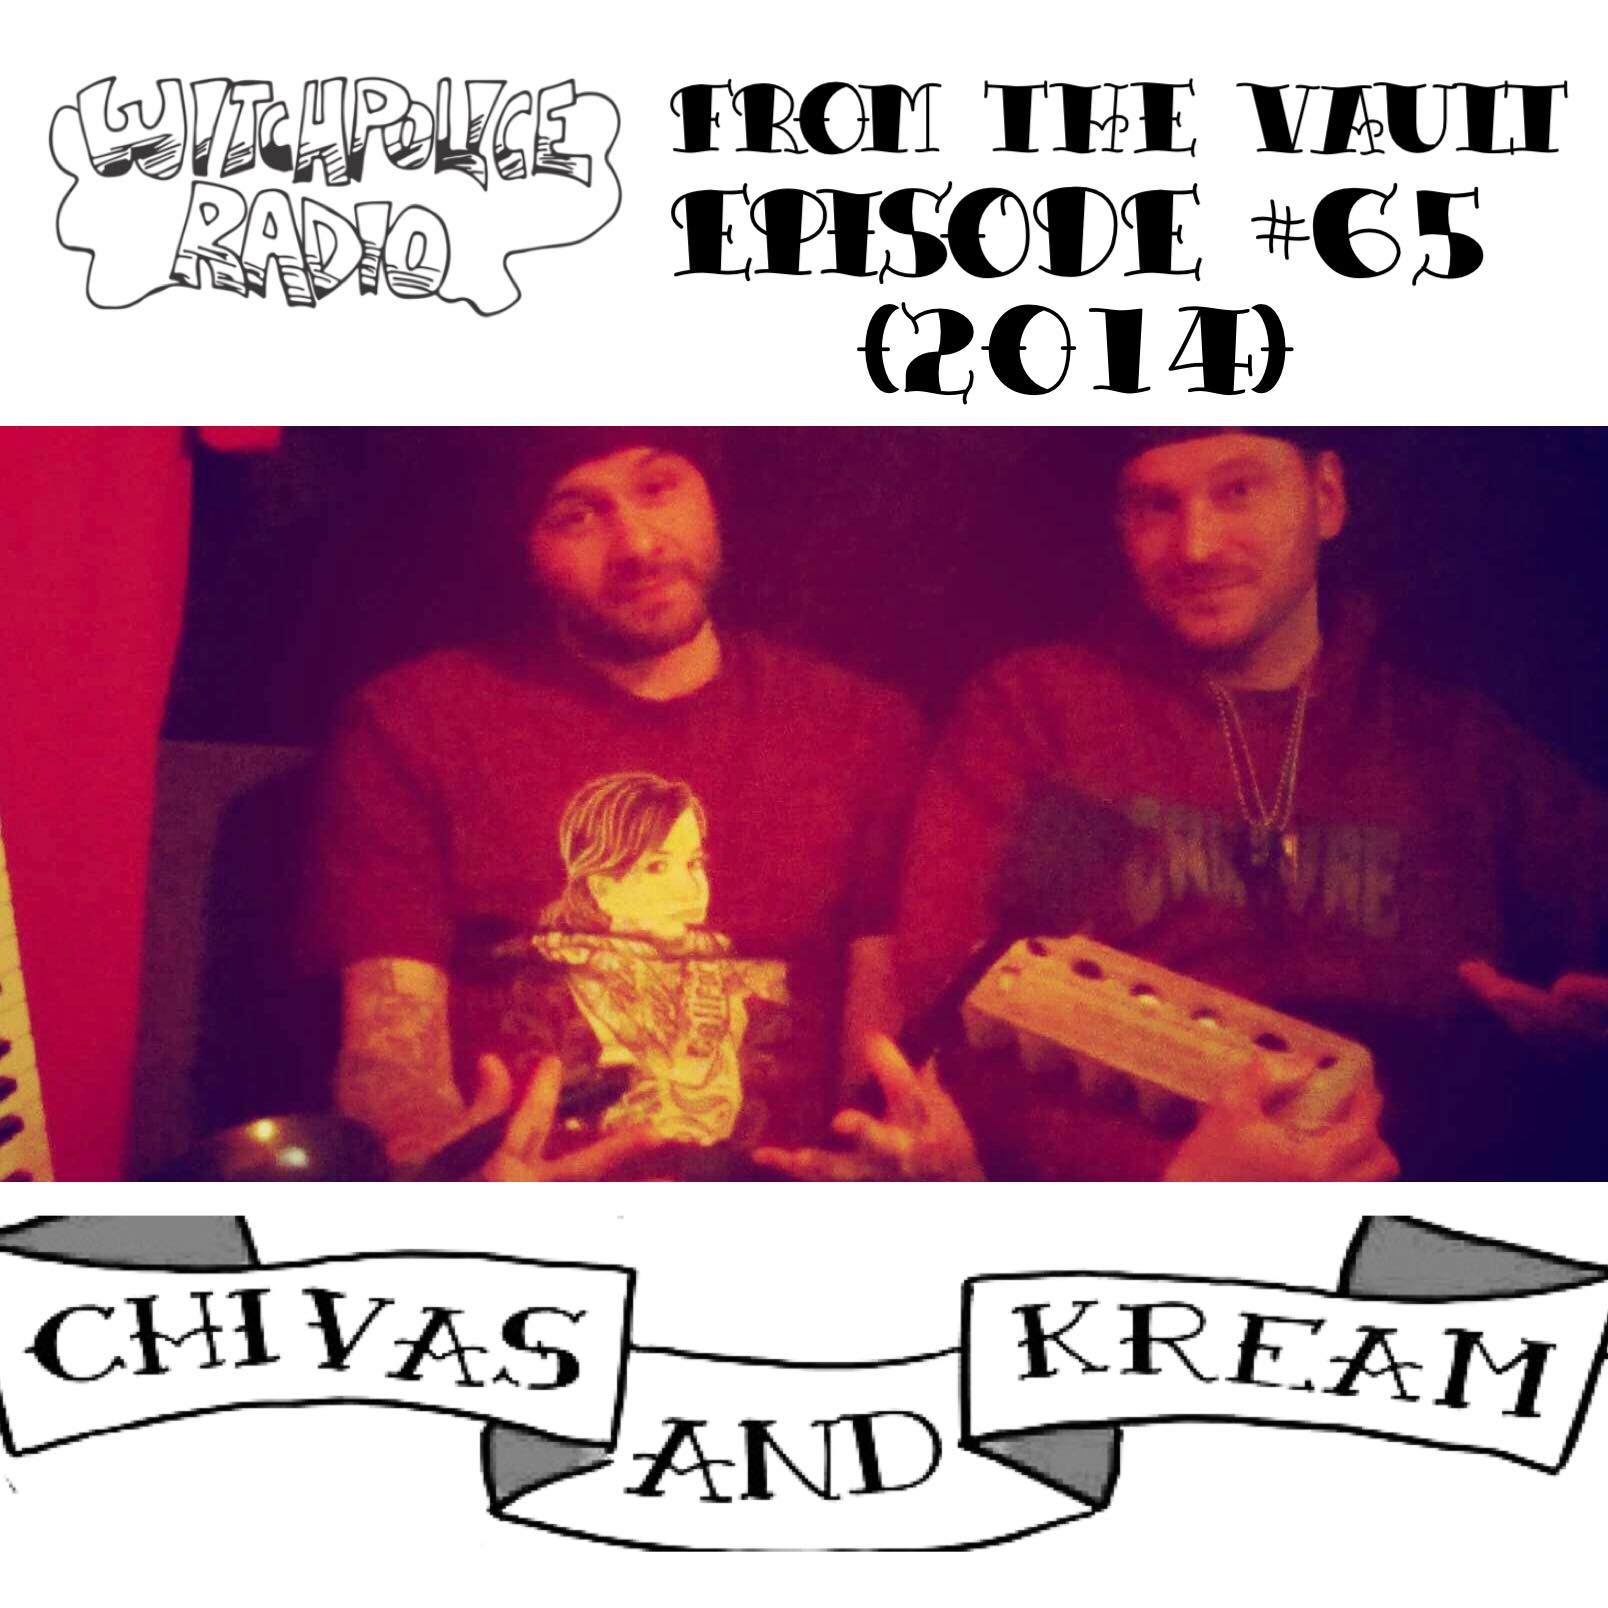 From the Vault: Chivas and Kream (2014)